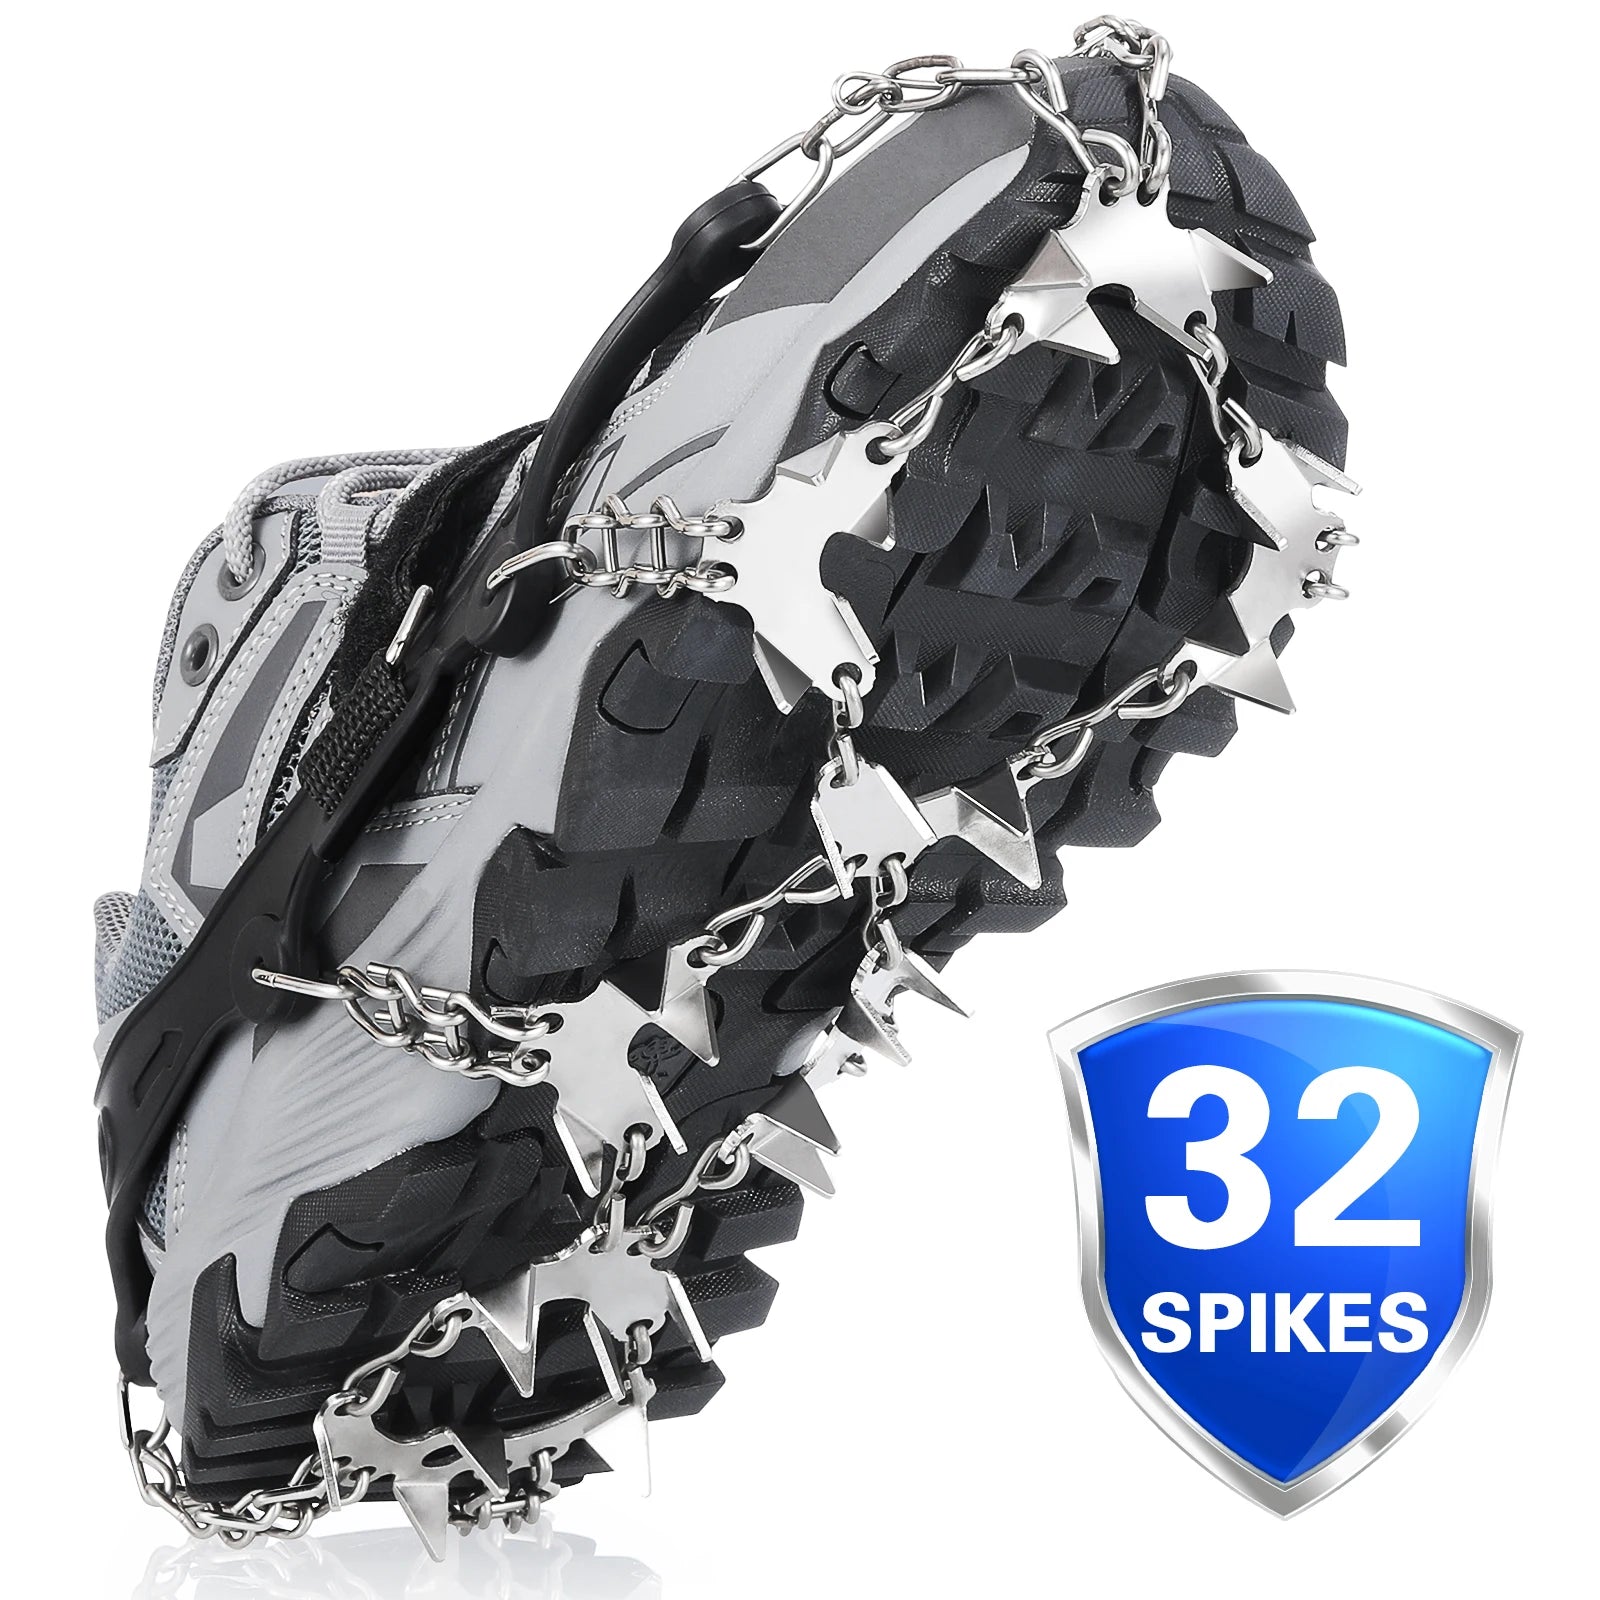 Durable Snow Spikes Crampons Cleats Designed for Enhanced Traction During Hiking and Climbing Adventures in Snowy Terrain